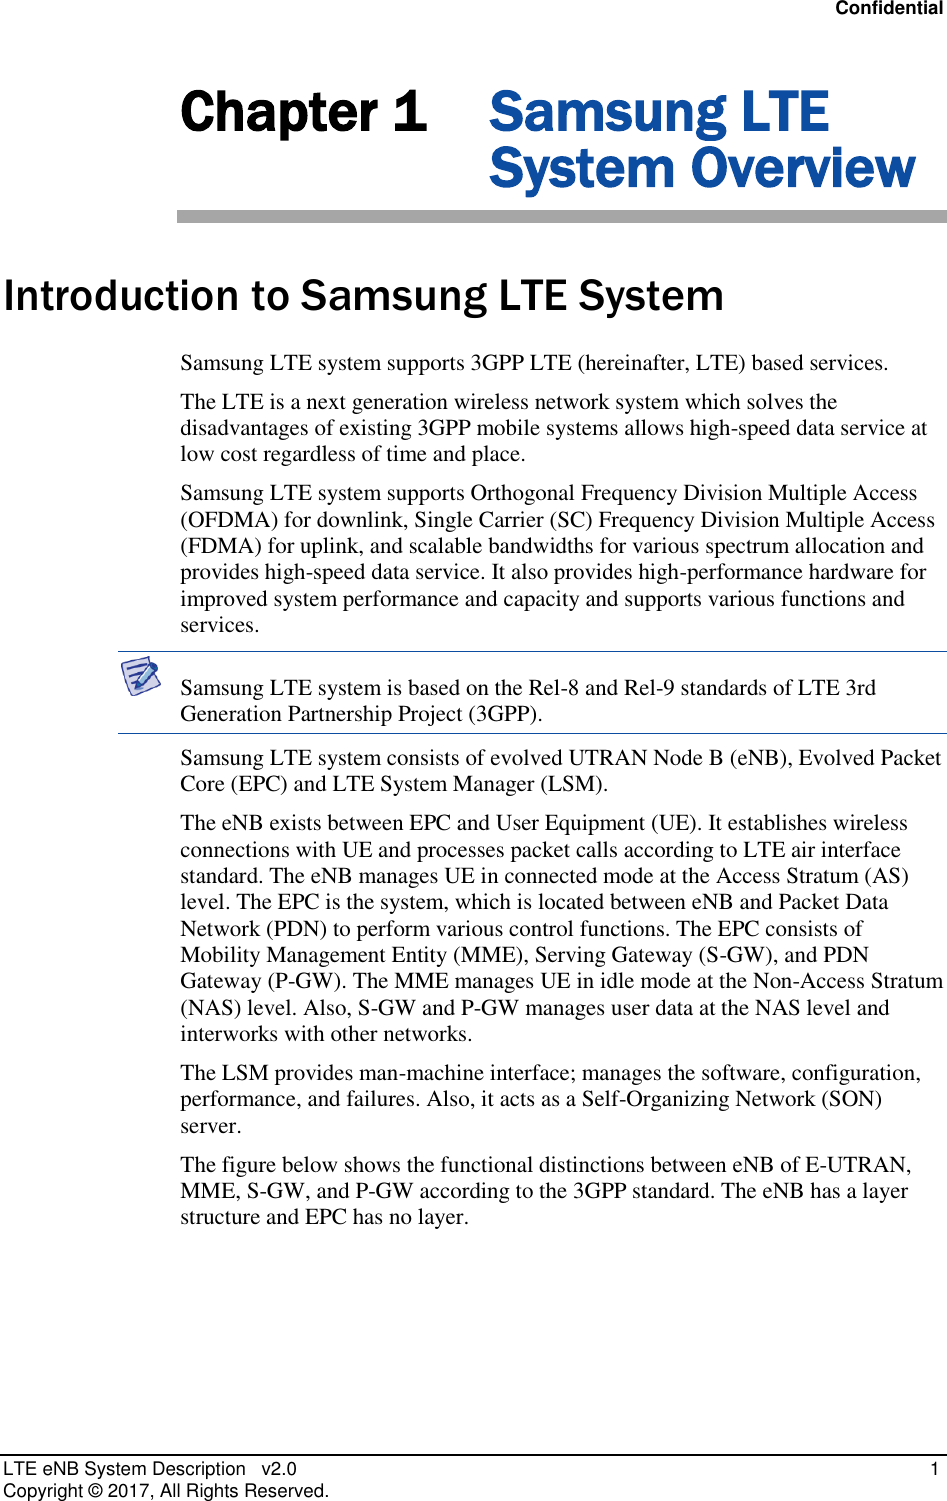 Confidential LTE eNB System Description   v2.0    1 Copyright ©  2017, All Rights Reserved. Chapter 1 Samsung LTE System Overview Introduction to Samsung LTE System Samsung LTE system supports 3GPP LTE (hereinafter, LTE) based services. The LTE is a next generation wireless network system which solves the disadvantages of existing 3GPP mobile systems allows high-speed data service at low cost regardless of time and place. Samsung LTE system supports Orthogonal Frequency Division Multiple Access (OFDMA) for downlink, Single Carrier (SC) Frequency Division Multiple Access (FDMA) for uplink, and scalable bandwidths for various spectrum allocation and provides high-speed data service. It also provides high-performance hardware for improved system performance and capacity and supports various functions and services.  Samsung LTE system is based on the Rel-8 and Rel-9 standards of LTE 3rd Generation Partnership Project (3GPP). Samsung LTE system consists of evolved UTRAN Node B (eNB), Evolved Packet Core (EPC) and LTE System Manager (LSM). The eNB exists between EPC and User Equipment (UE). It establishes wireless connections with UE and processes packet calls according to LTE air interface standard. The eNB manages UE in connected mode at the Access Stratum (AS) level. The EPC is the system, which is located between eNB and Packet Data Network (PDN) to perform various control functions. The EPC consists of Mobility Management Entity (MME), Serving Gateway (S-GW), and PDN Gateway (P-GW). The MME manages UE in idle mode at the Non-Access Stratum (NAS) level. Also, S-GW and P-GW manages user data at the NAS level and interworks with other networks. The LSM provides man-machine interface; manages the software, configuration, performance, and failures. Also, it acts as a Self-Organizing Network (SON) server. The figure below shows the functional distinctions between eNB of E-UTRAN, MME, S-GW, and P-GW according to the 3GPP standard. The eNB has a layer structure and EPC has no layer. 